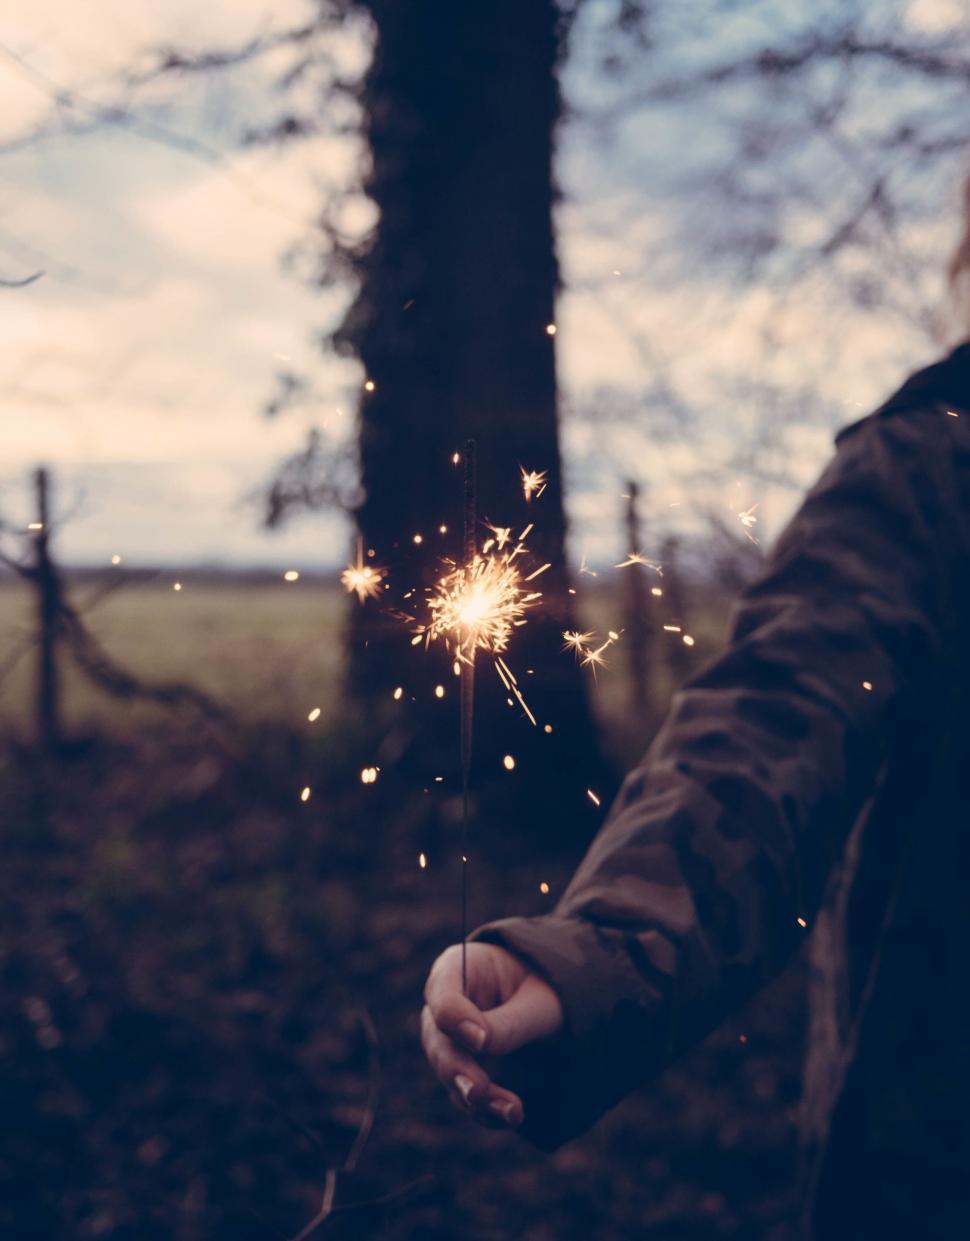 Free Image of Holding a sparkler in a twilight hour 